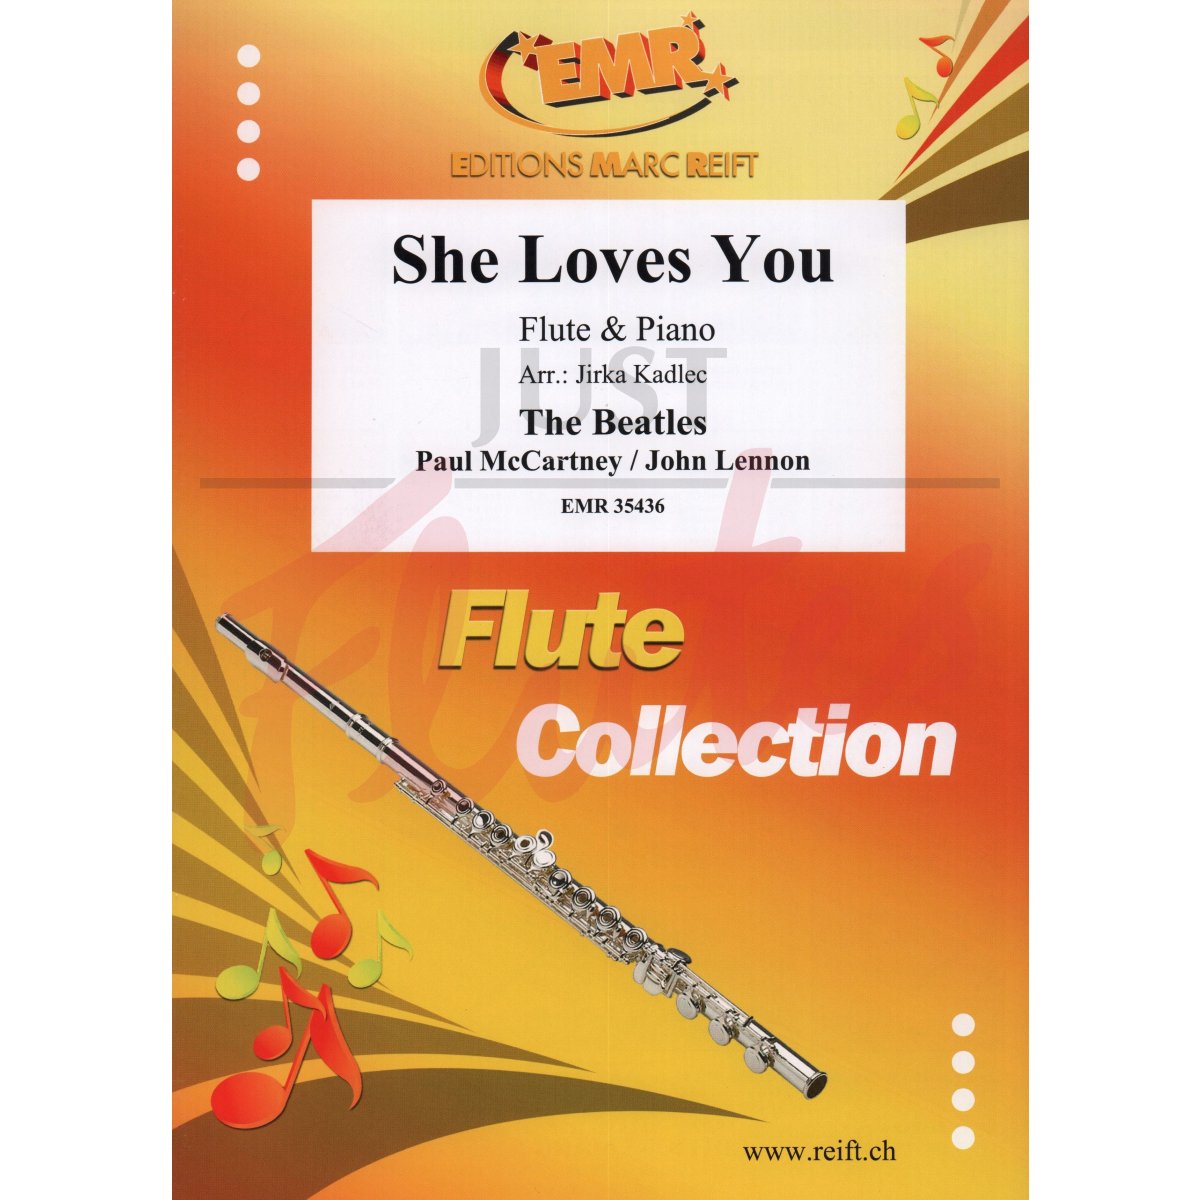 She Loves You for Flute and Piano